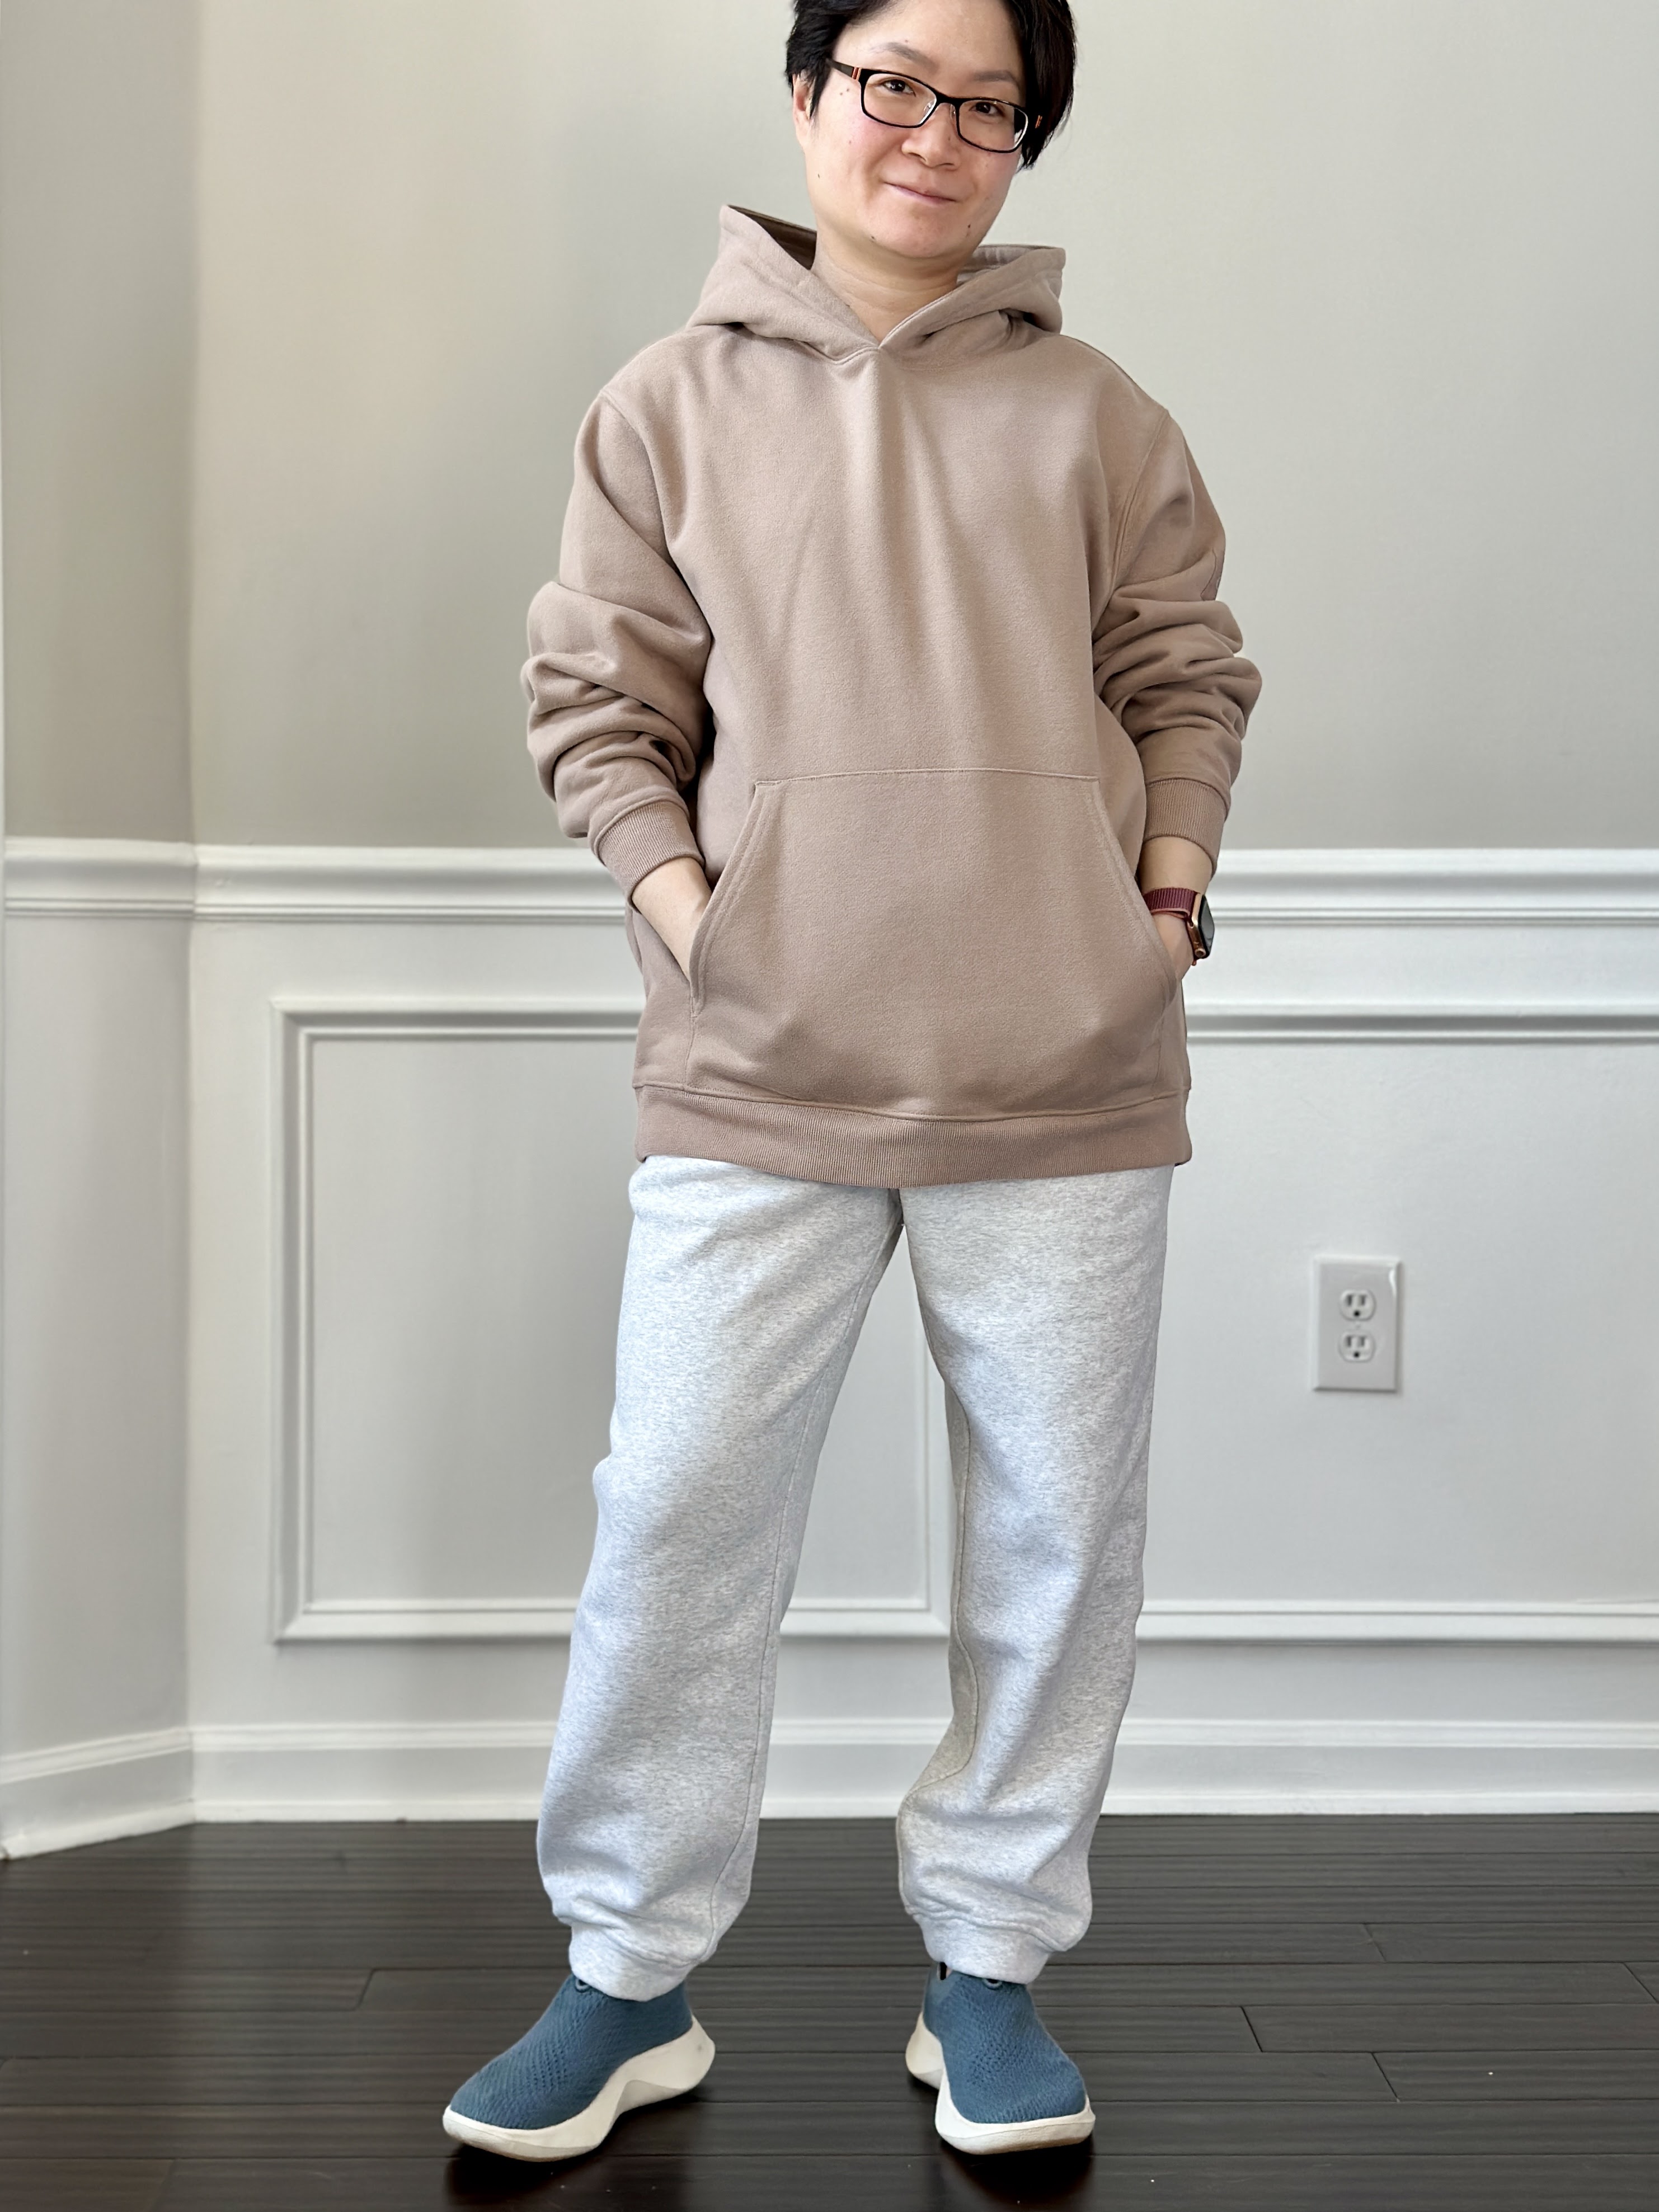 What has been your experience with this hoodie? : r/aloyoga